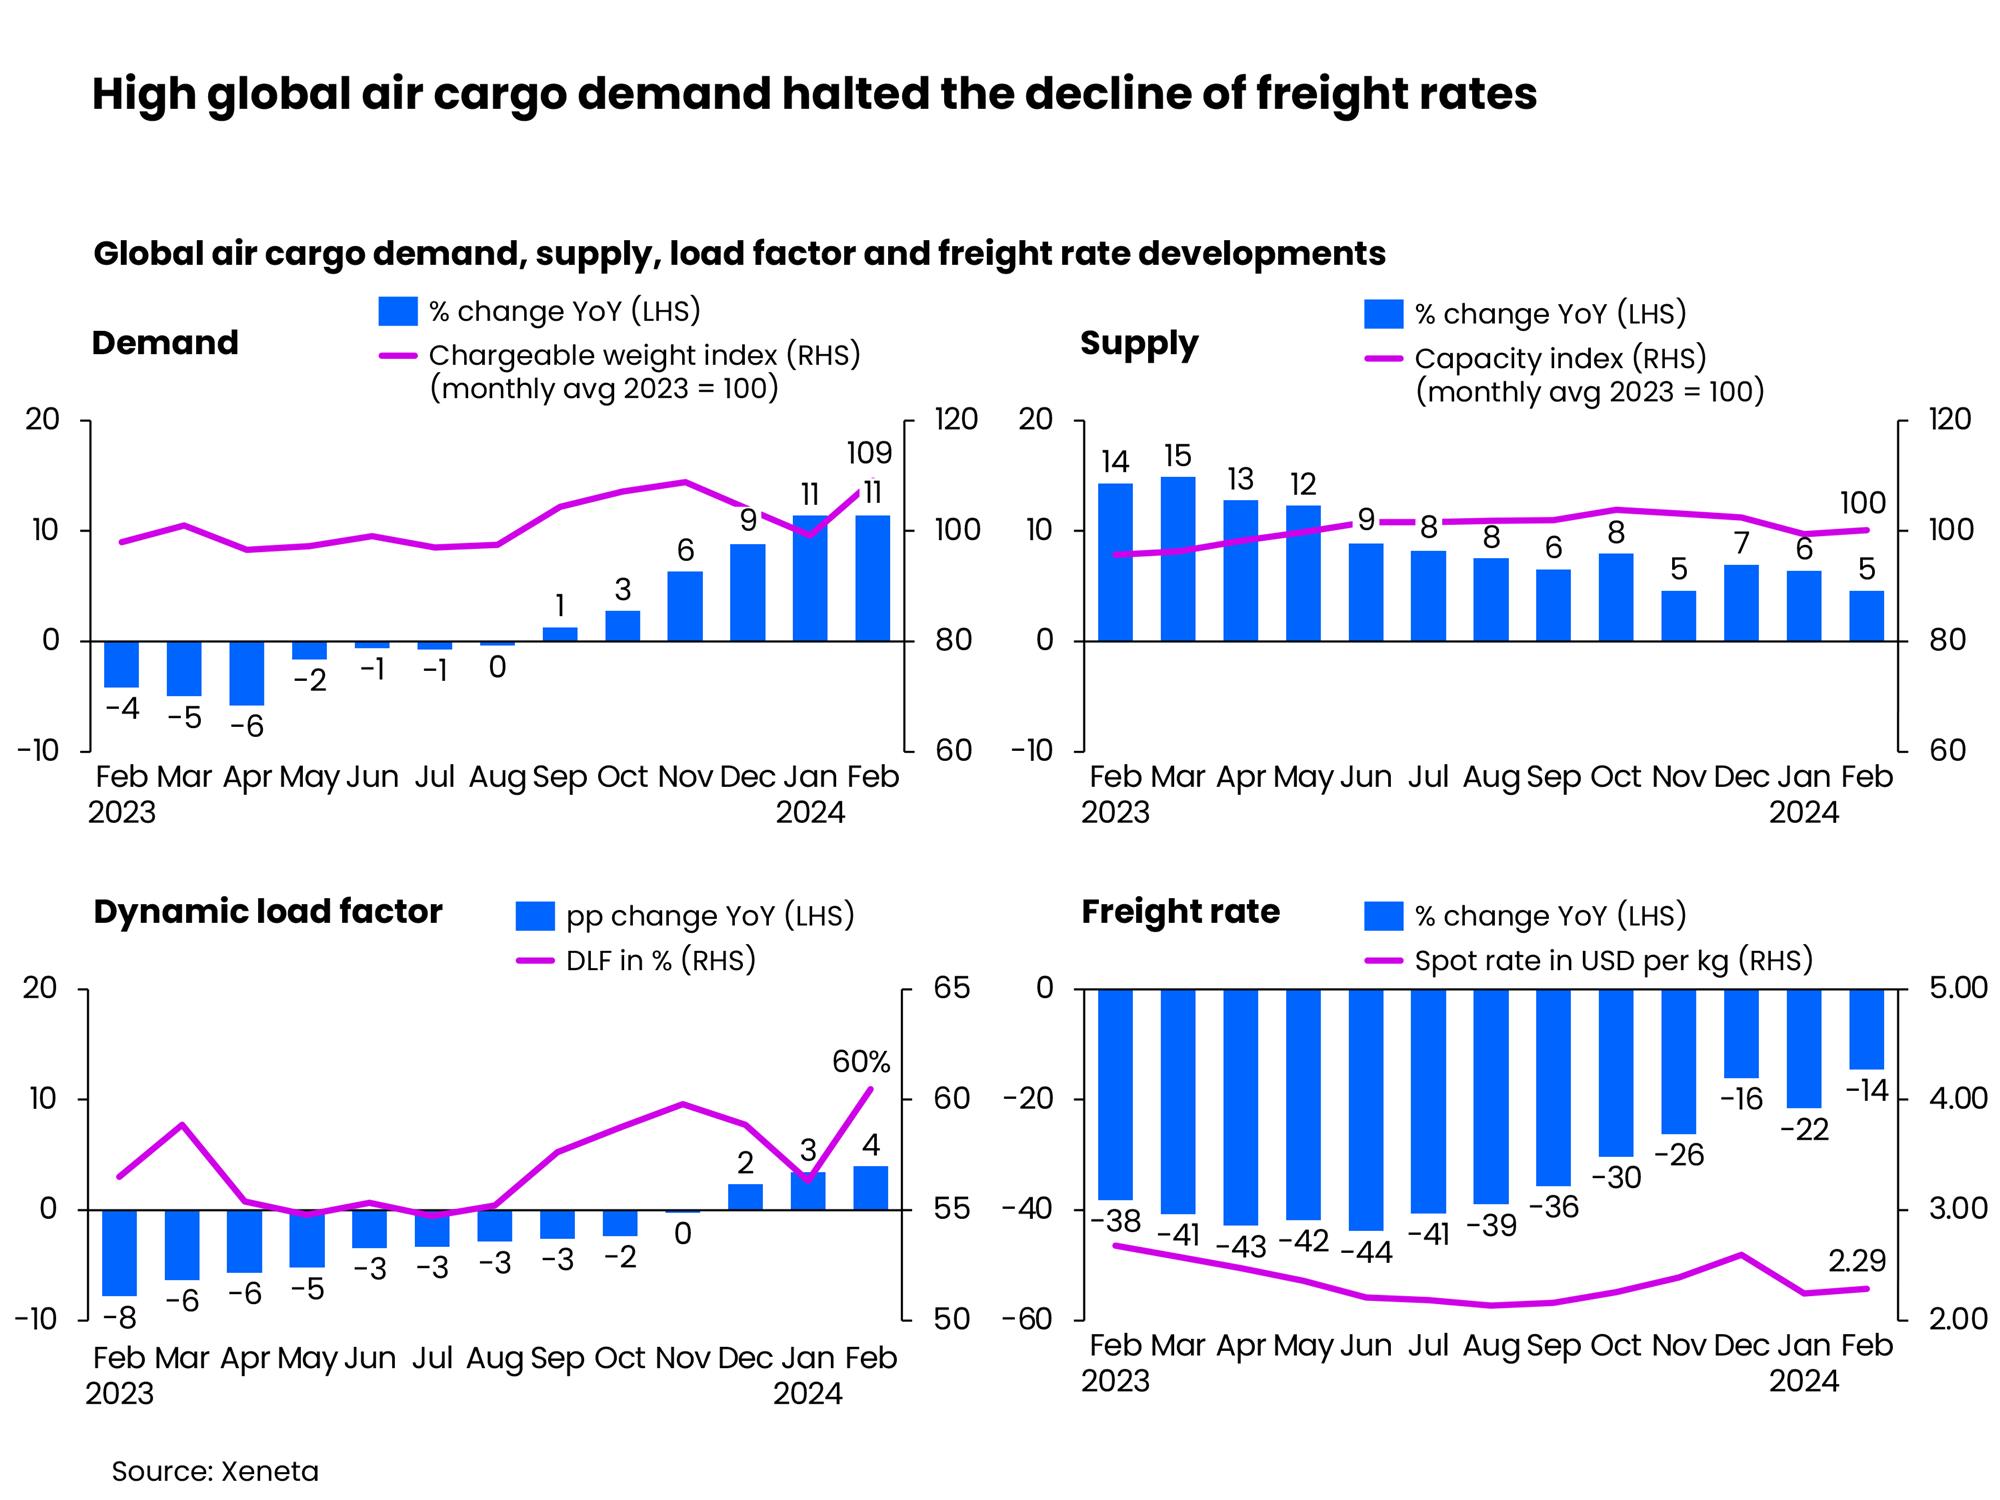 Self Photos / Files - High global air cargo demand halted the decline of freight rates